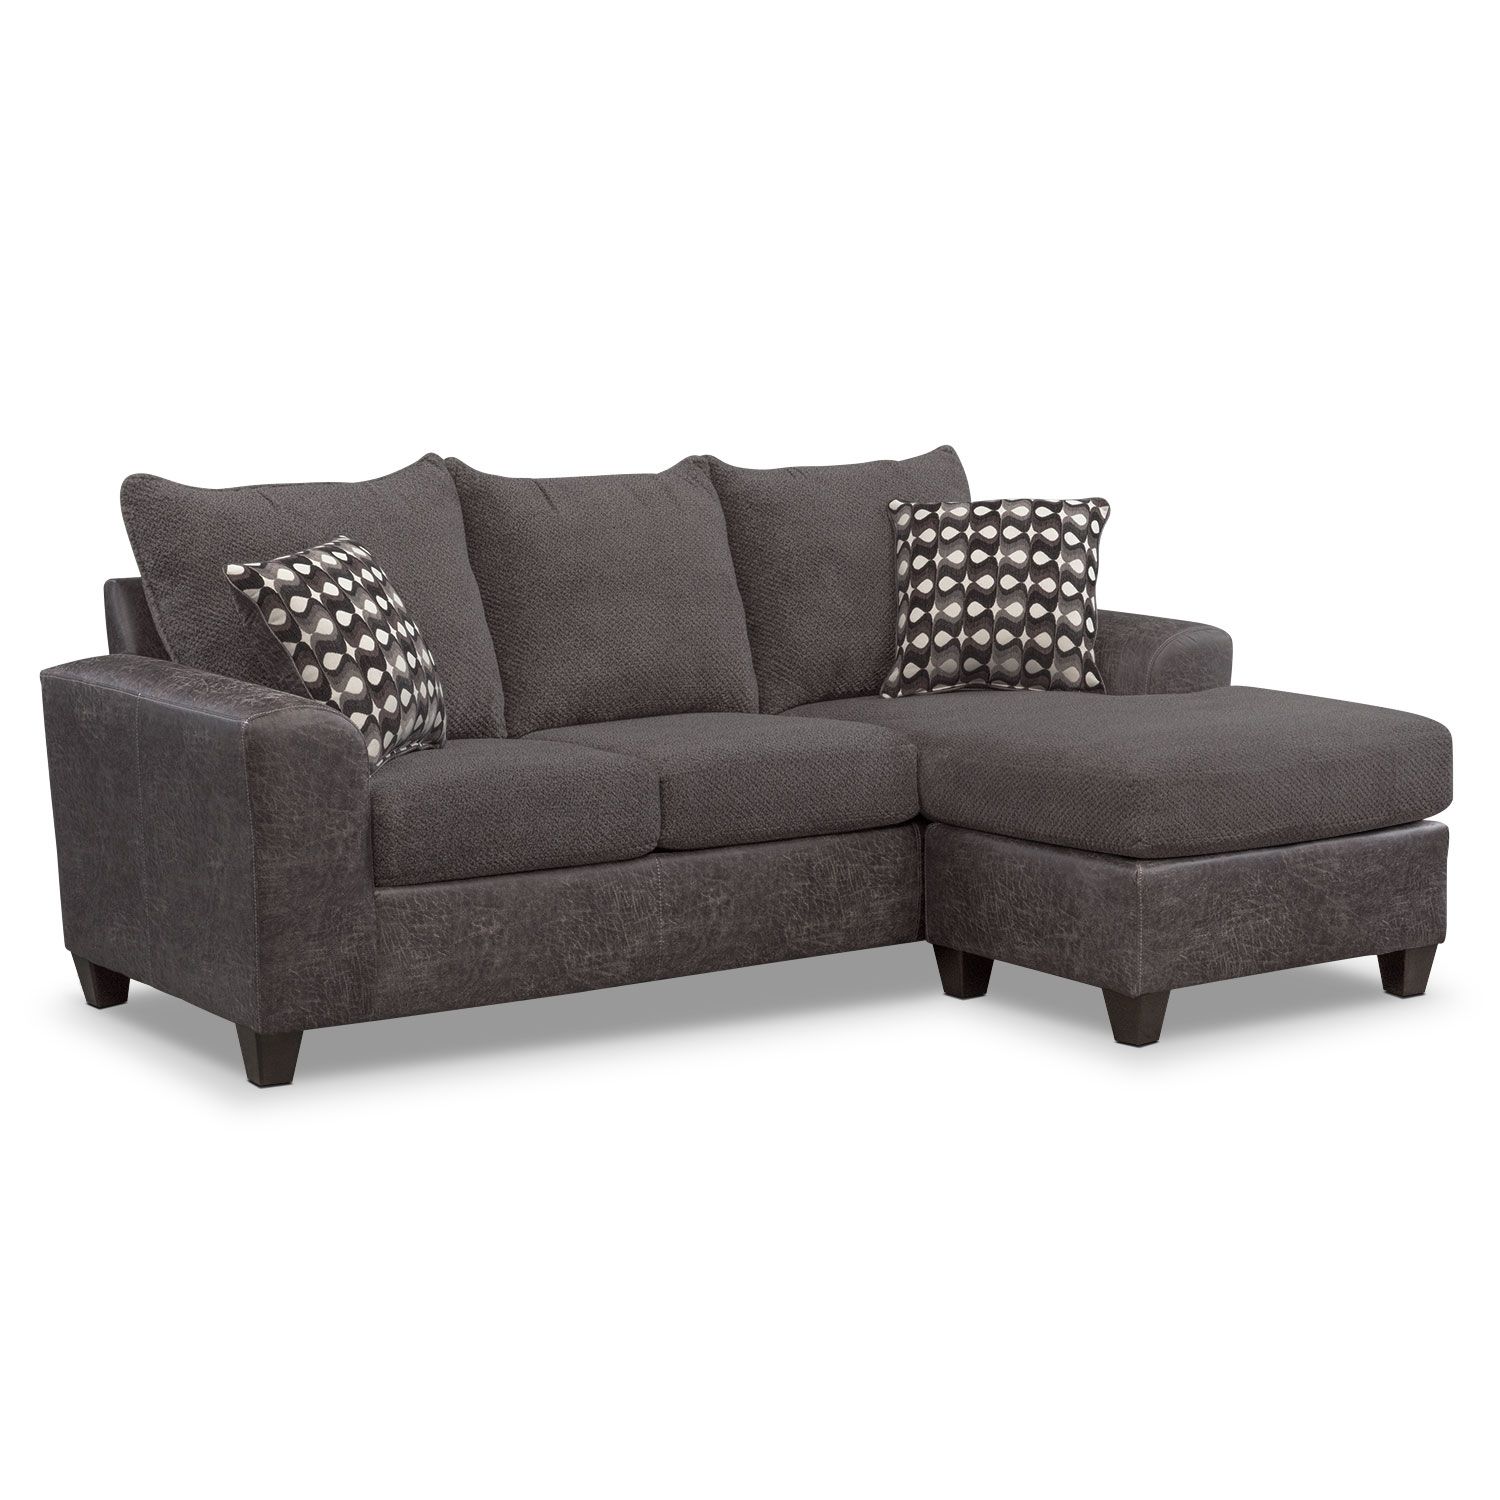 Sofas & Couches | Living Room Seating | Value City Furniture In Aquarius Dark Grey 2 Piece Sectionals With Raf Chaise (View 14 of 25)